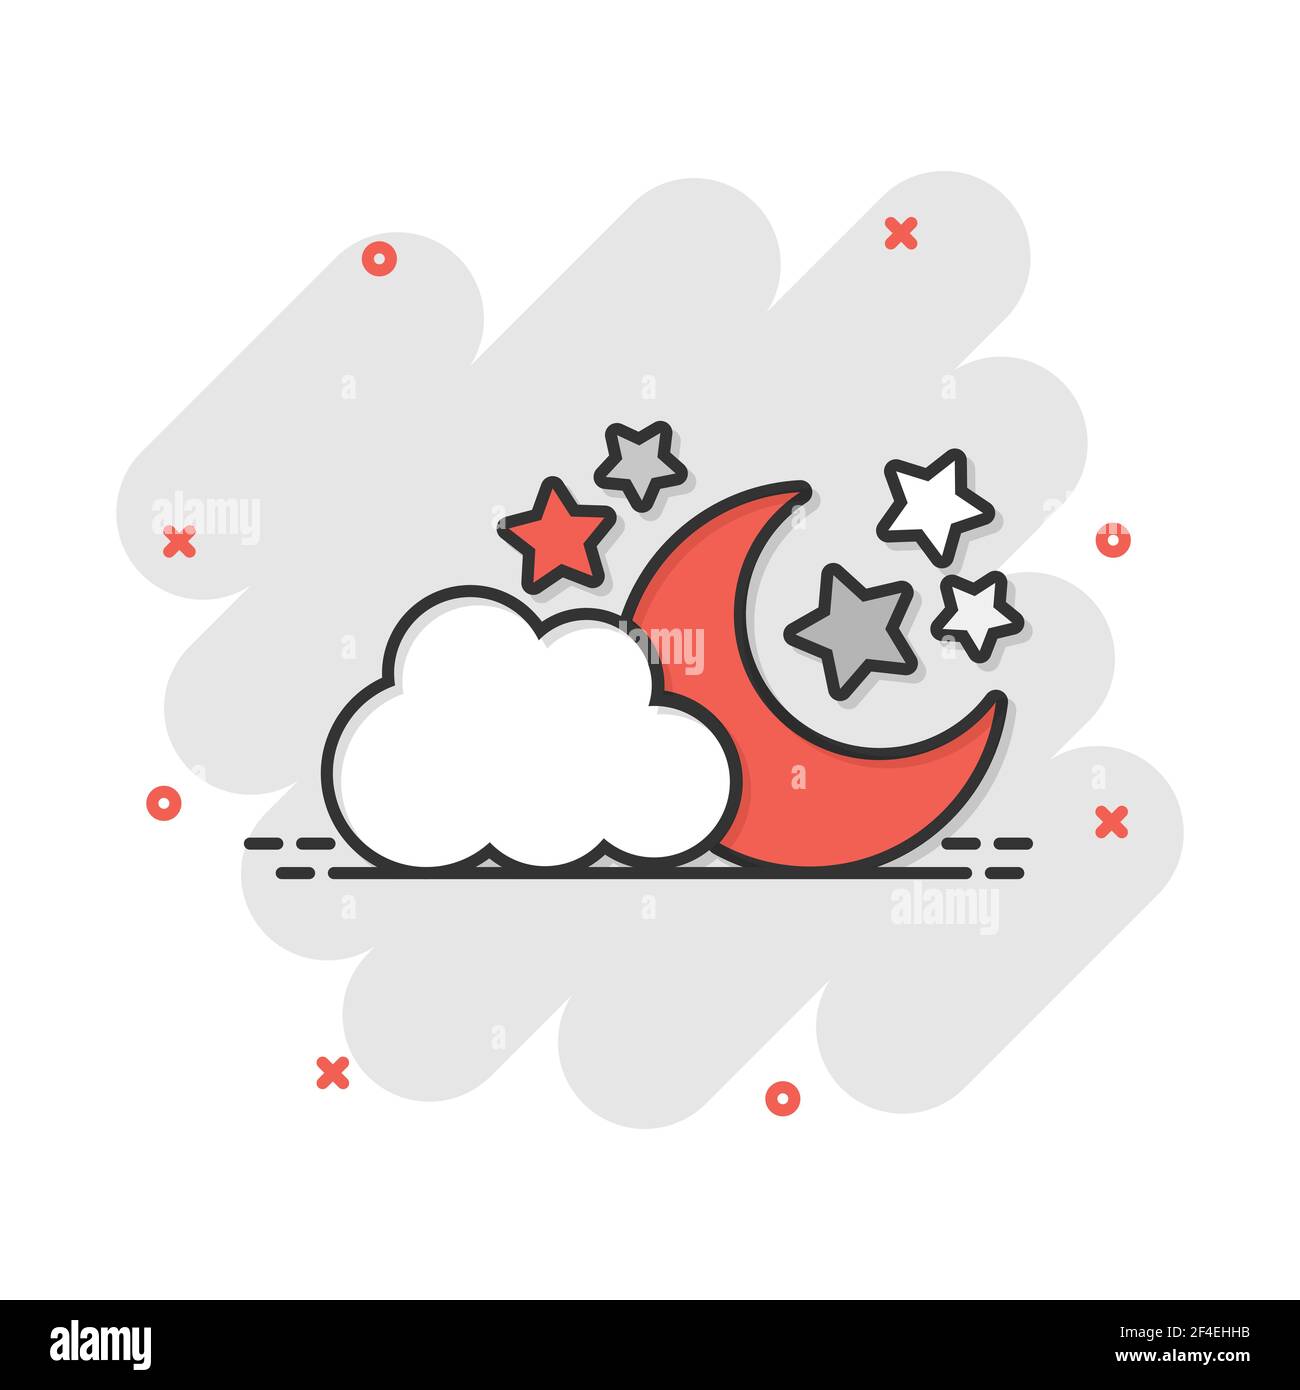 Vector cartoon moon and stars with clods icon in comic style. Nighttime concept illustration pictogram. Cloud, moon business splash effect concept. Stock Vector